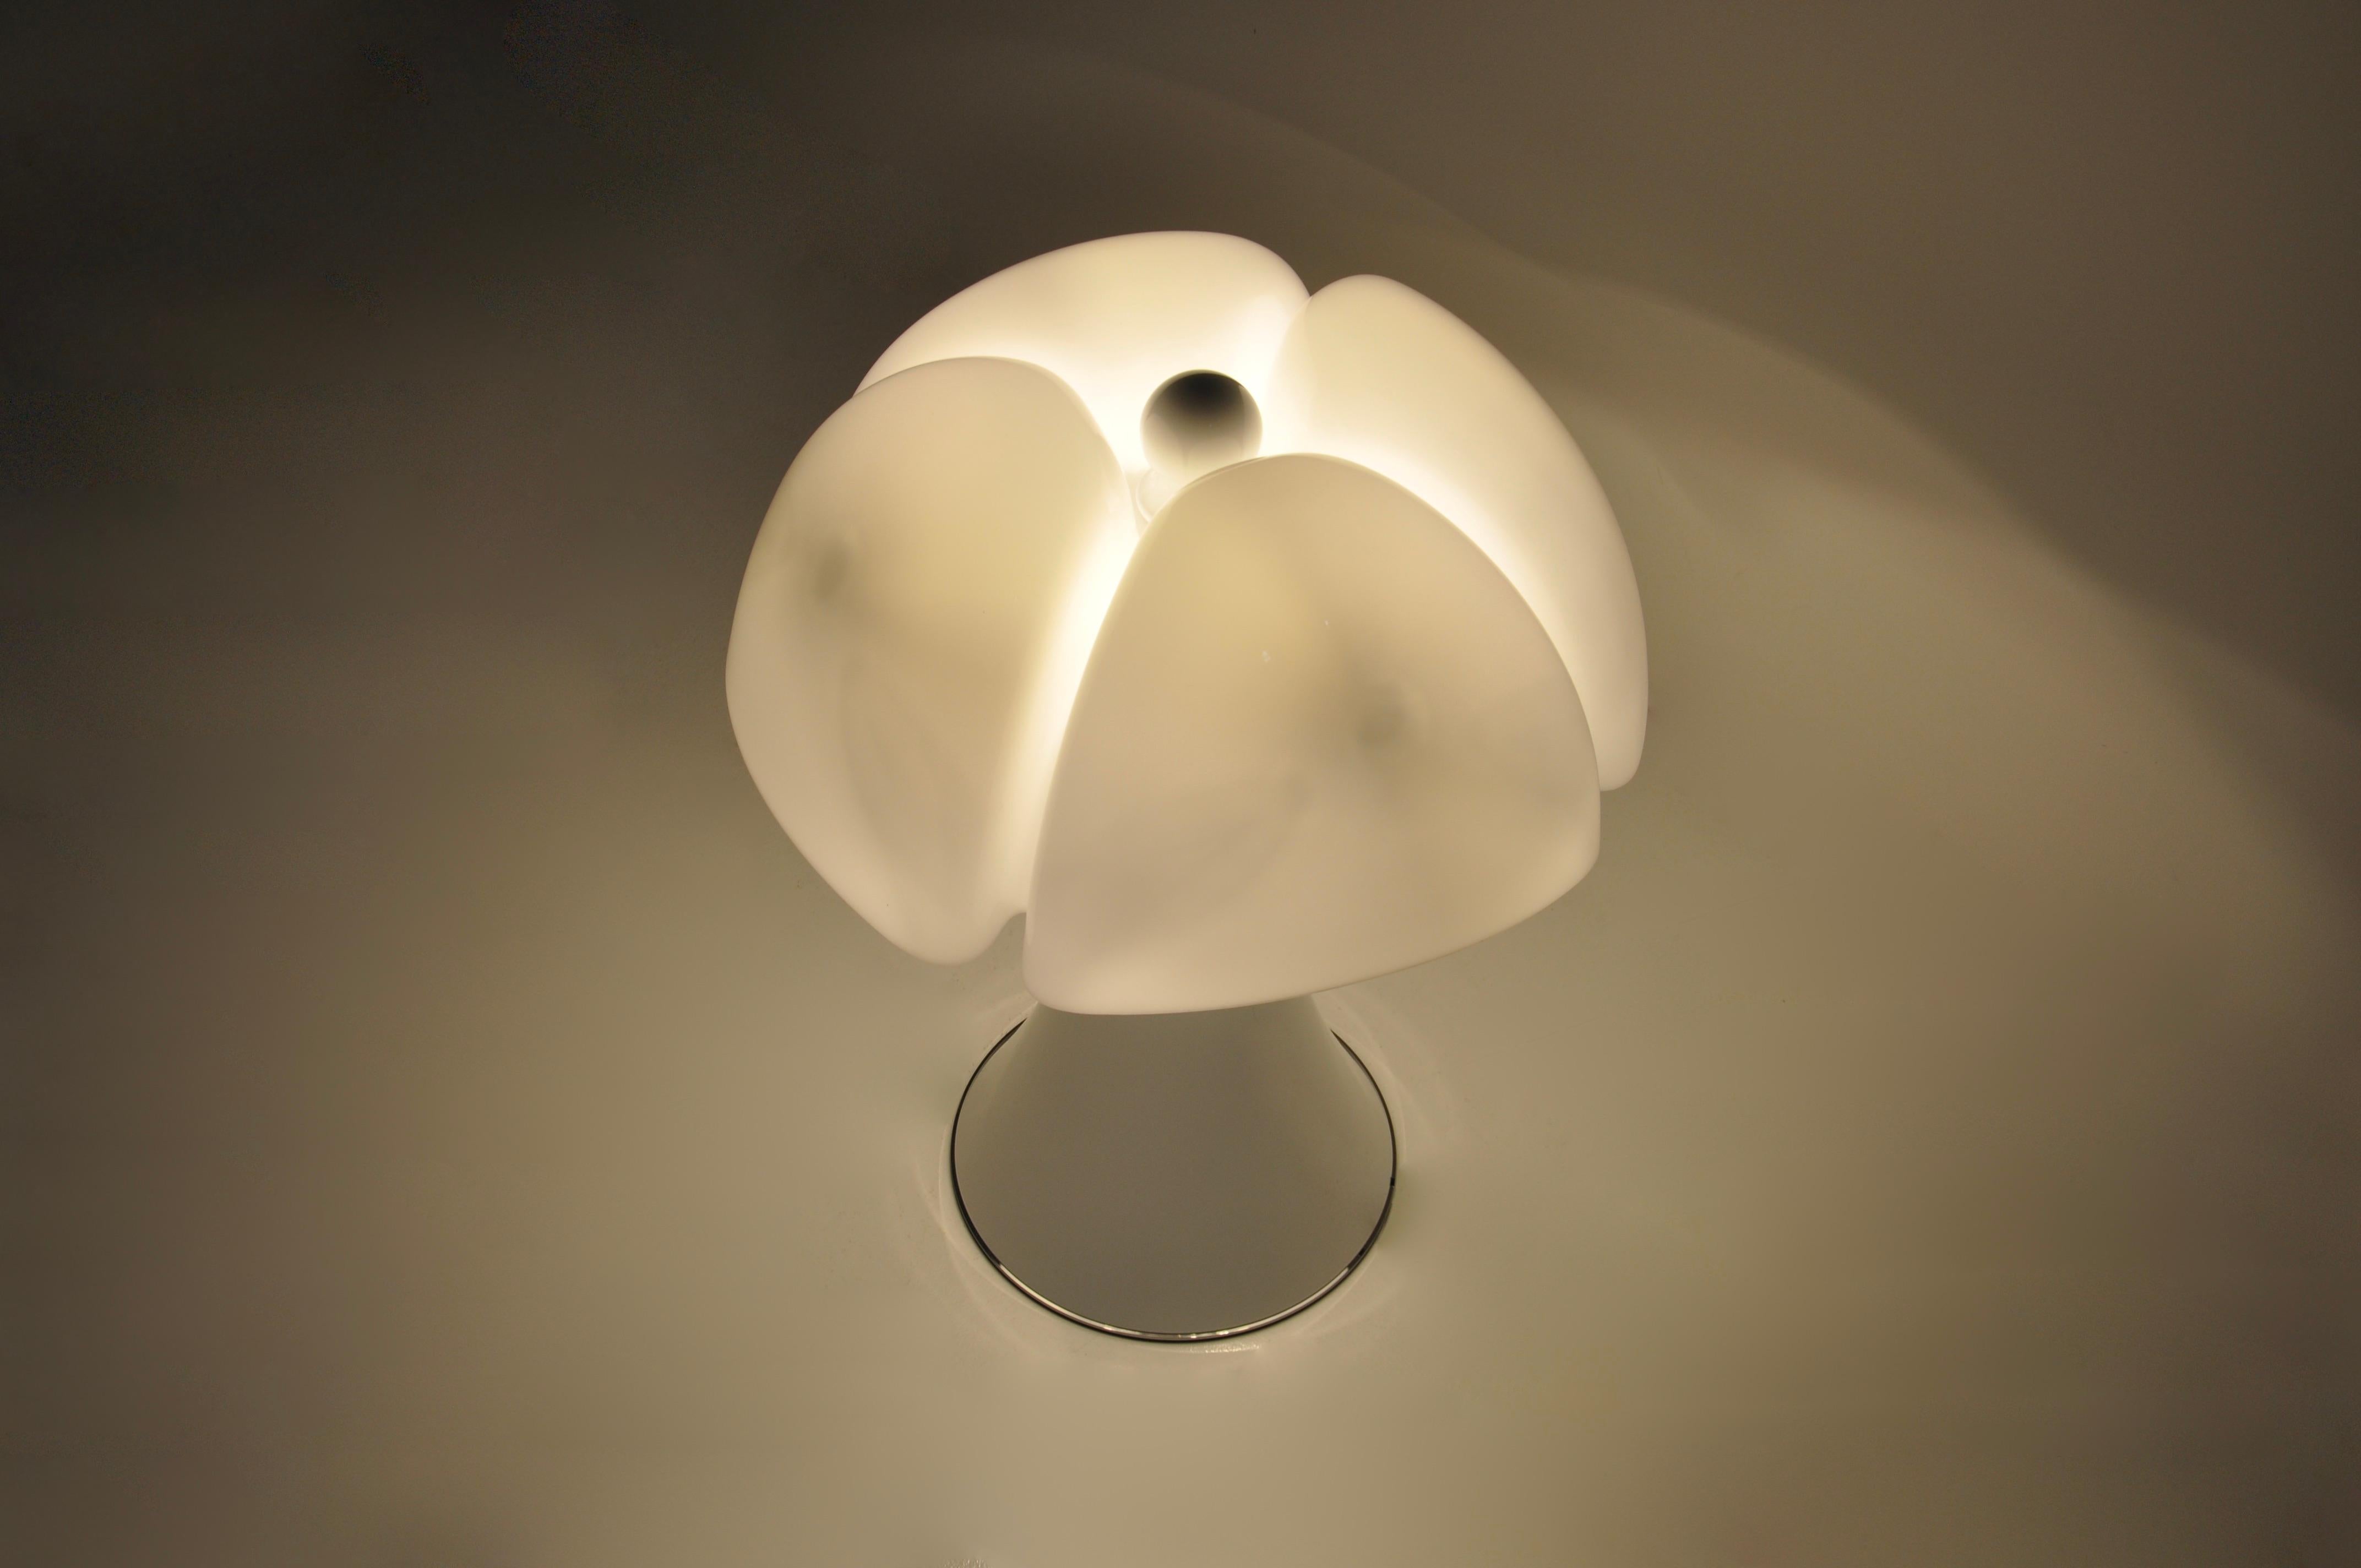 Late 20th Century White Pipistrello Table Lamp by Gae Aulenti for Martinelli Luce